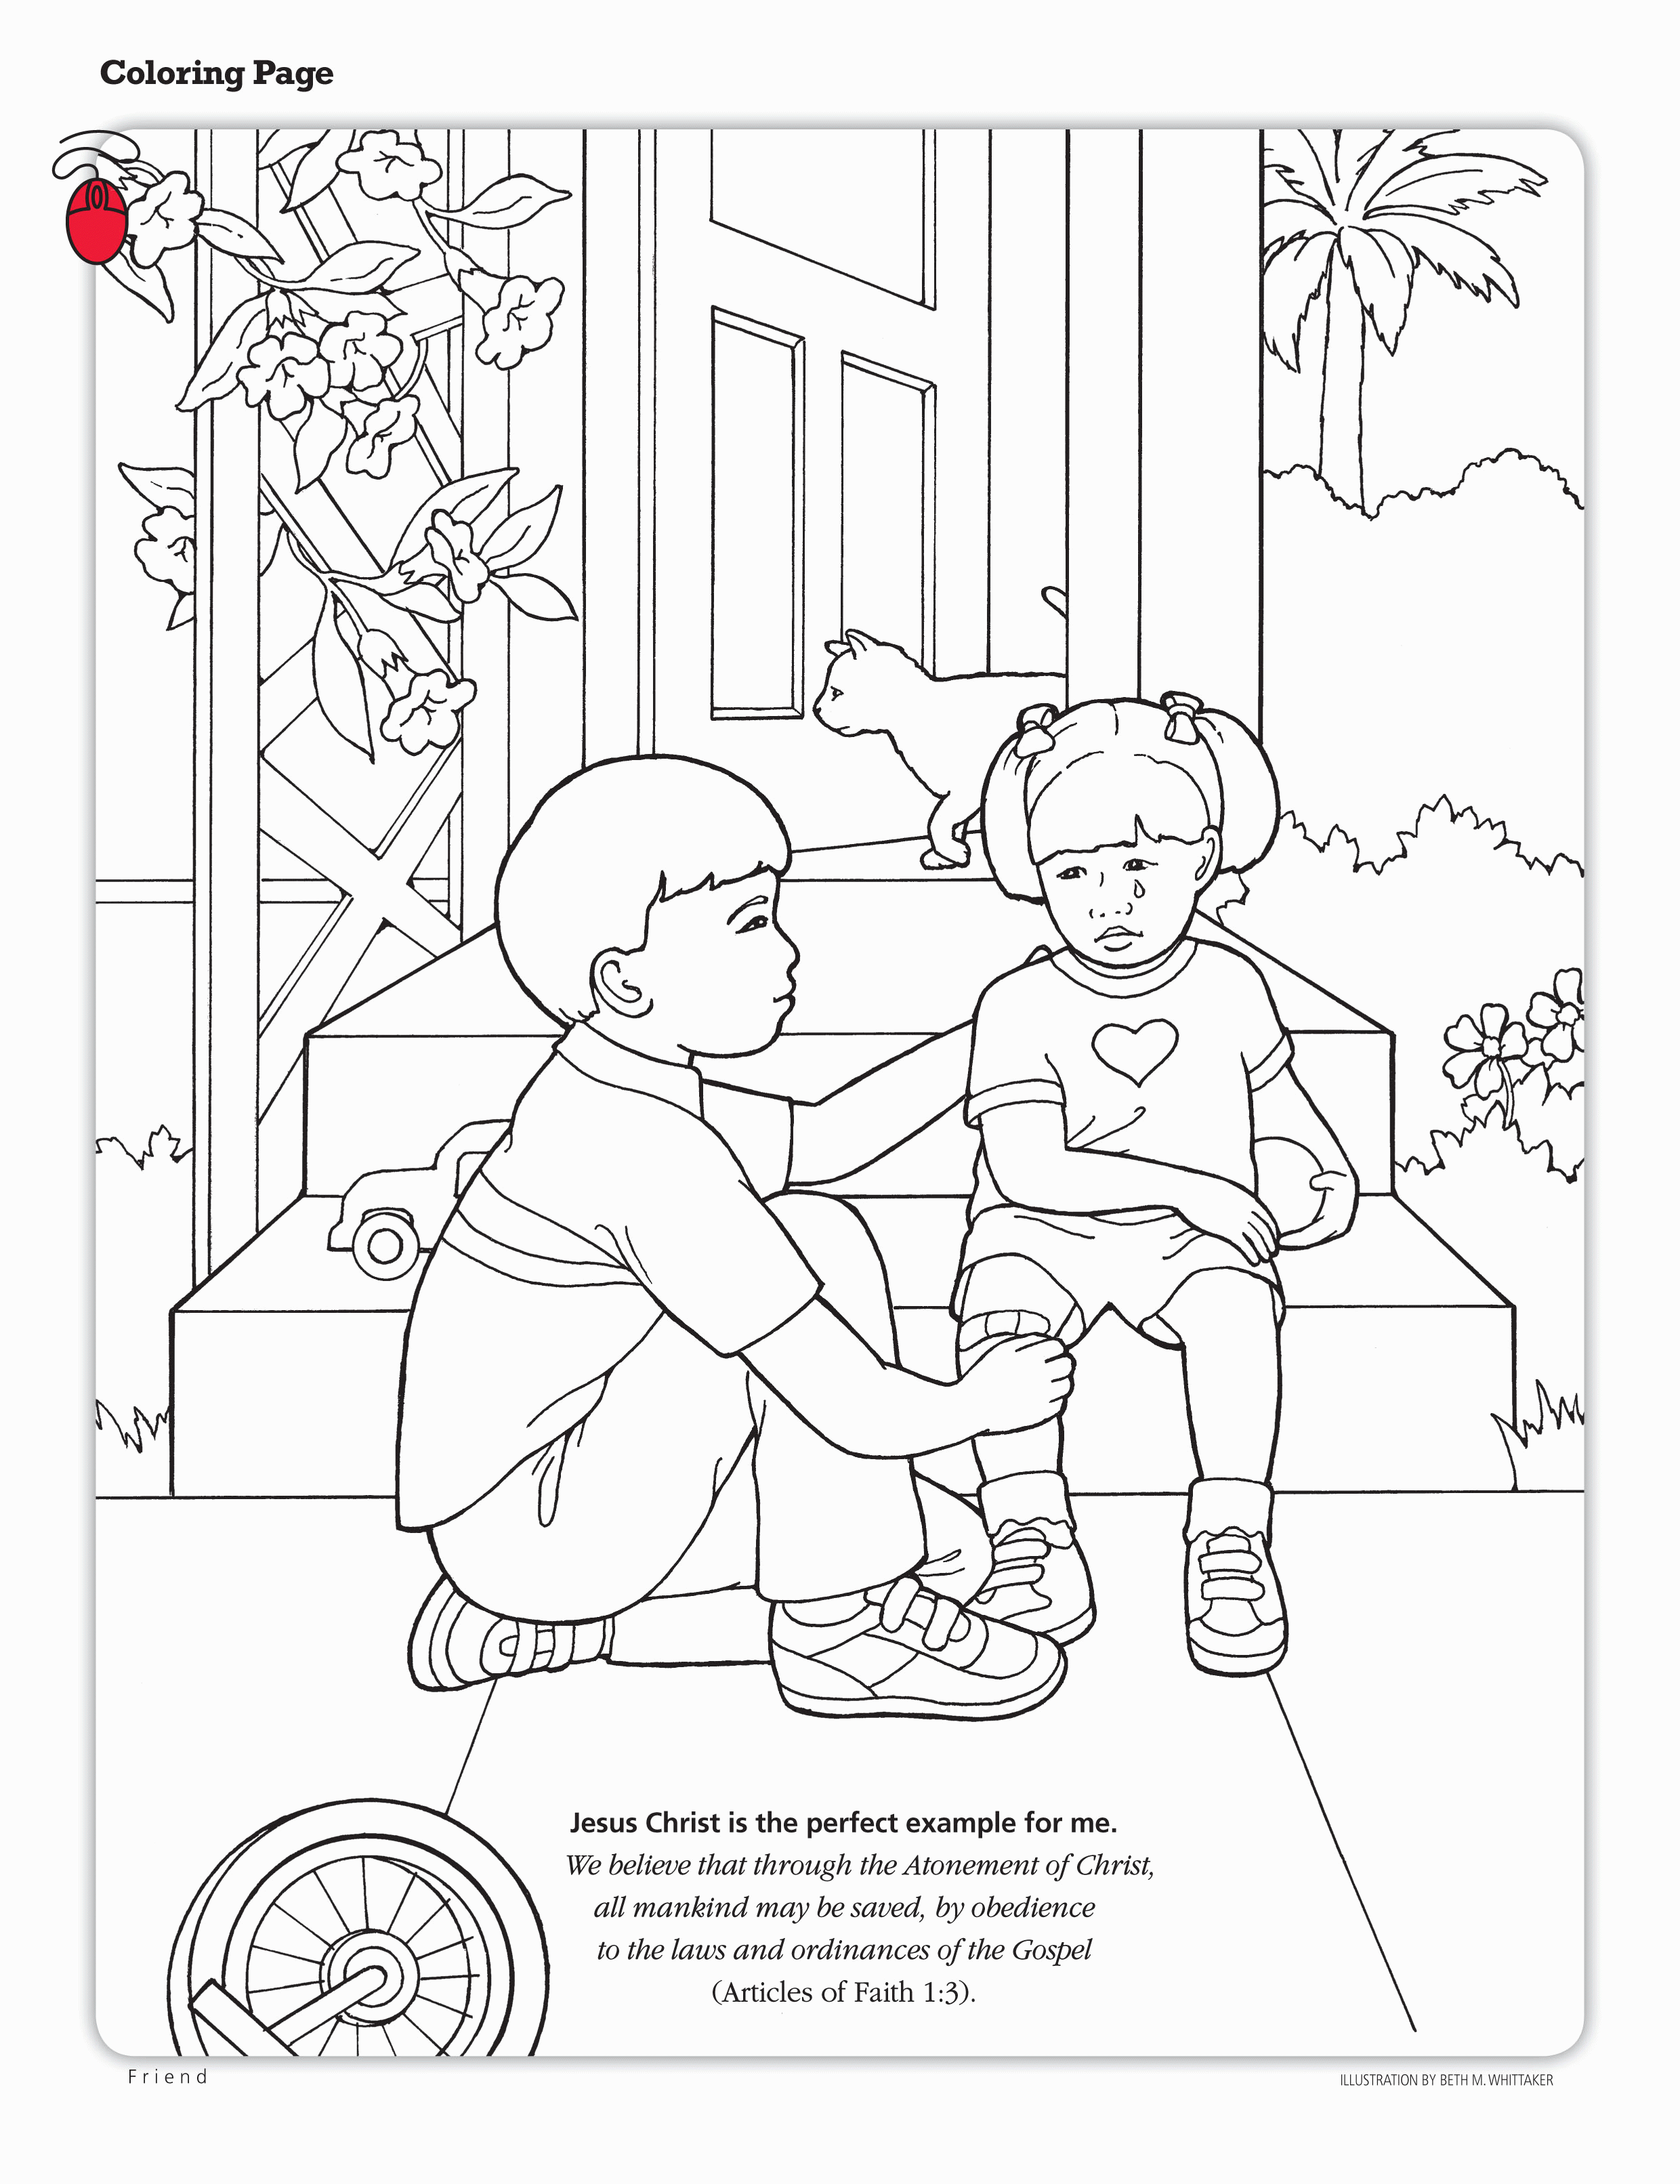 Coloring Picture Of Helping Others